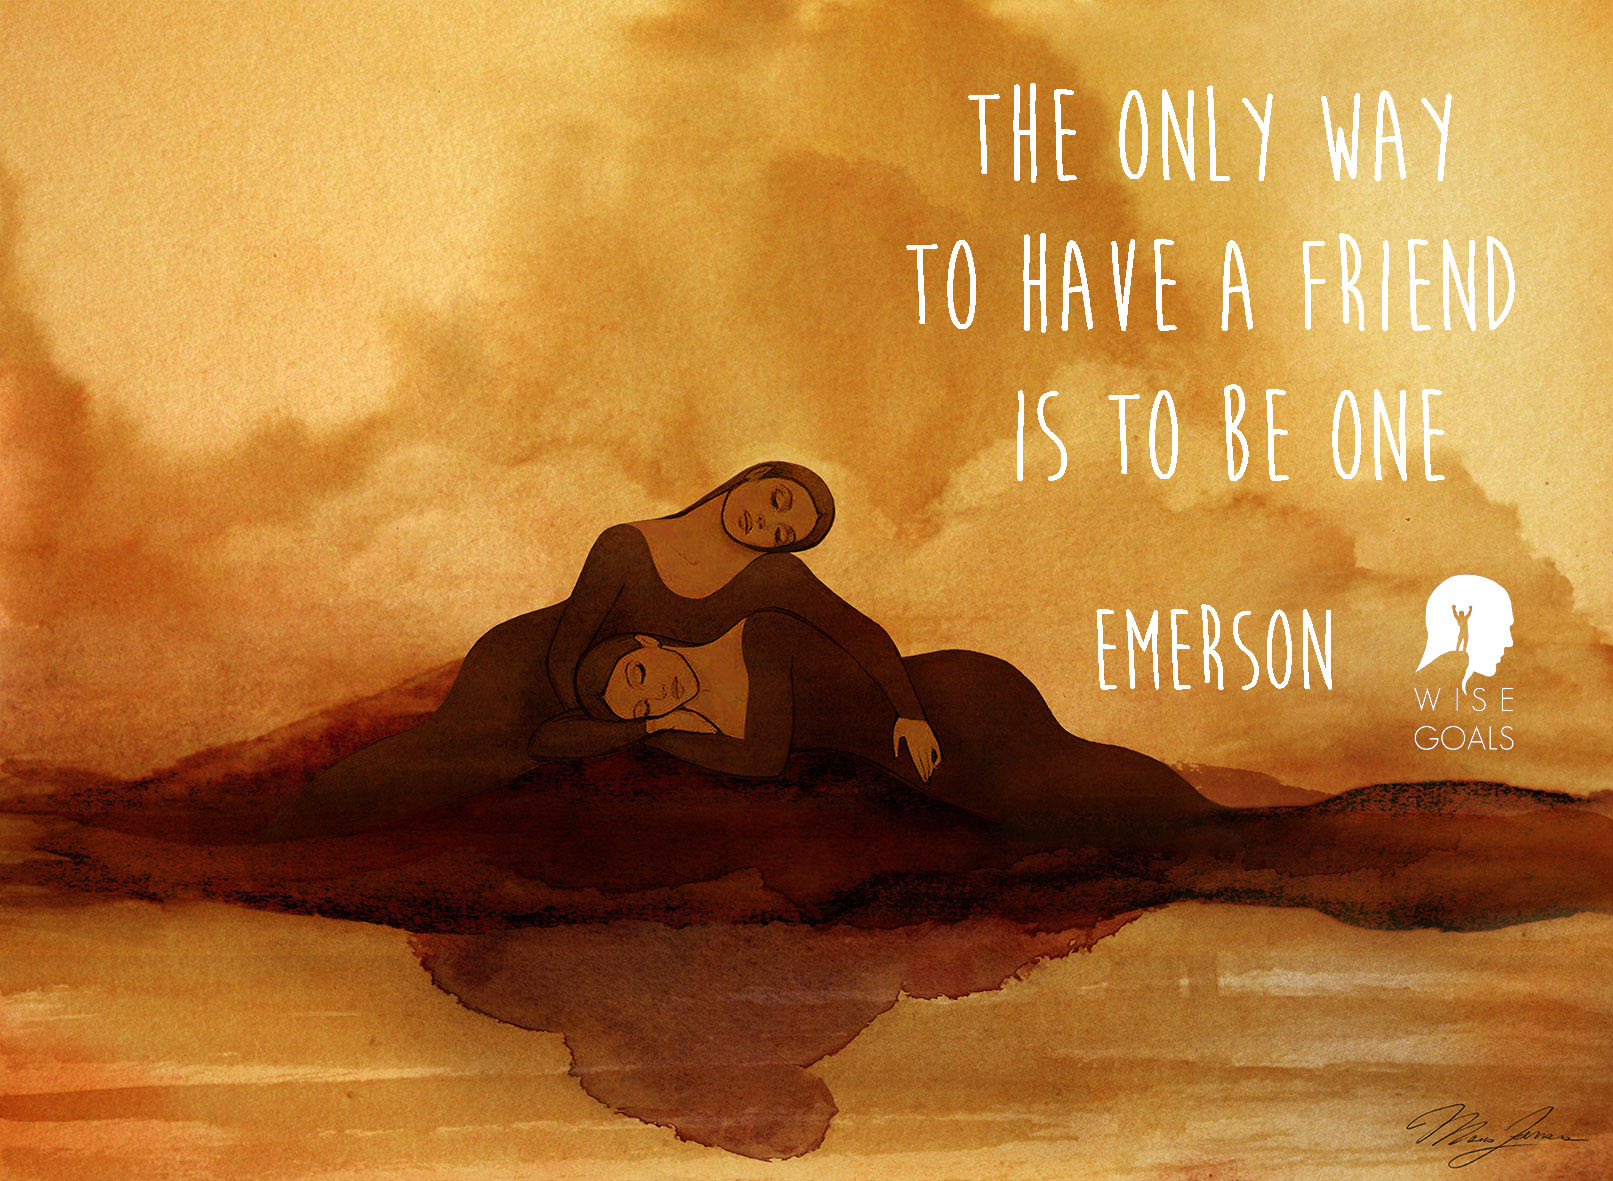 Emerson - The only way to have a friend is to be one quote